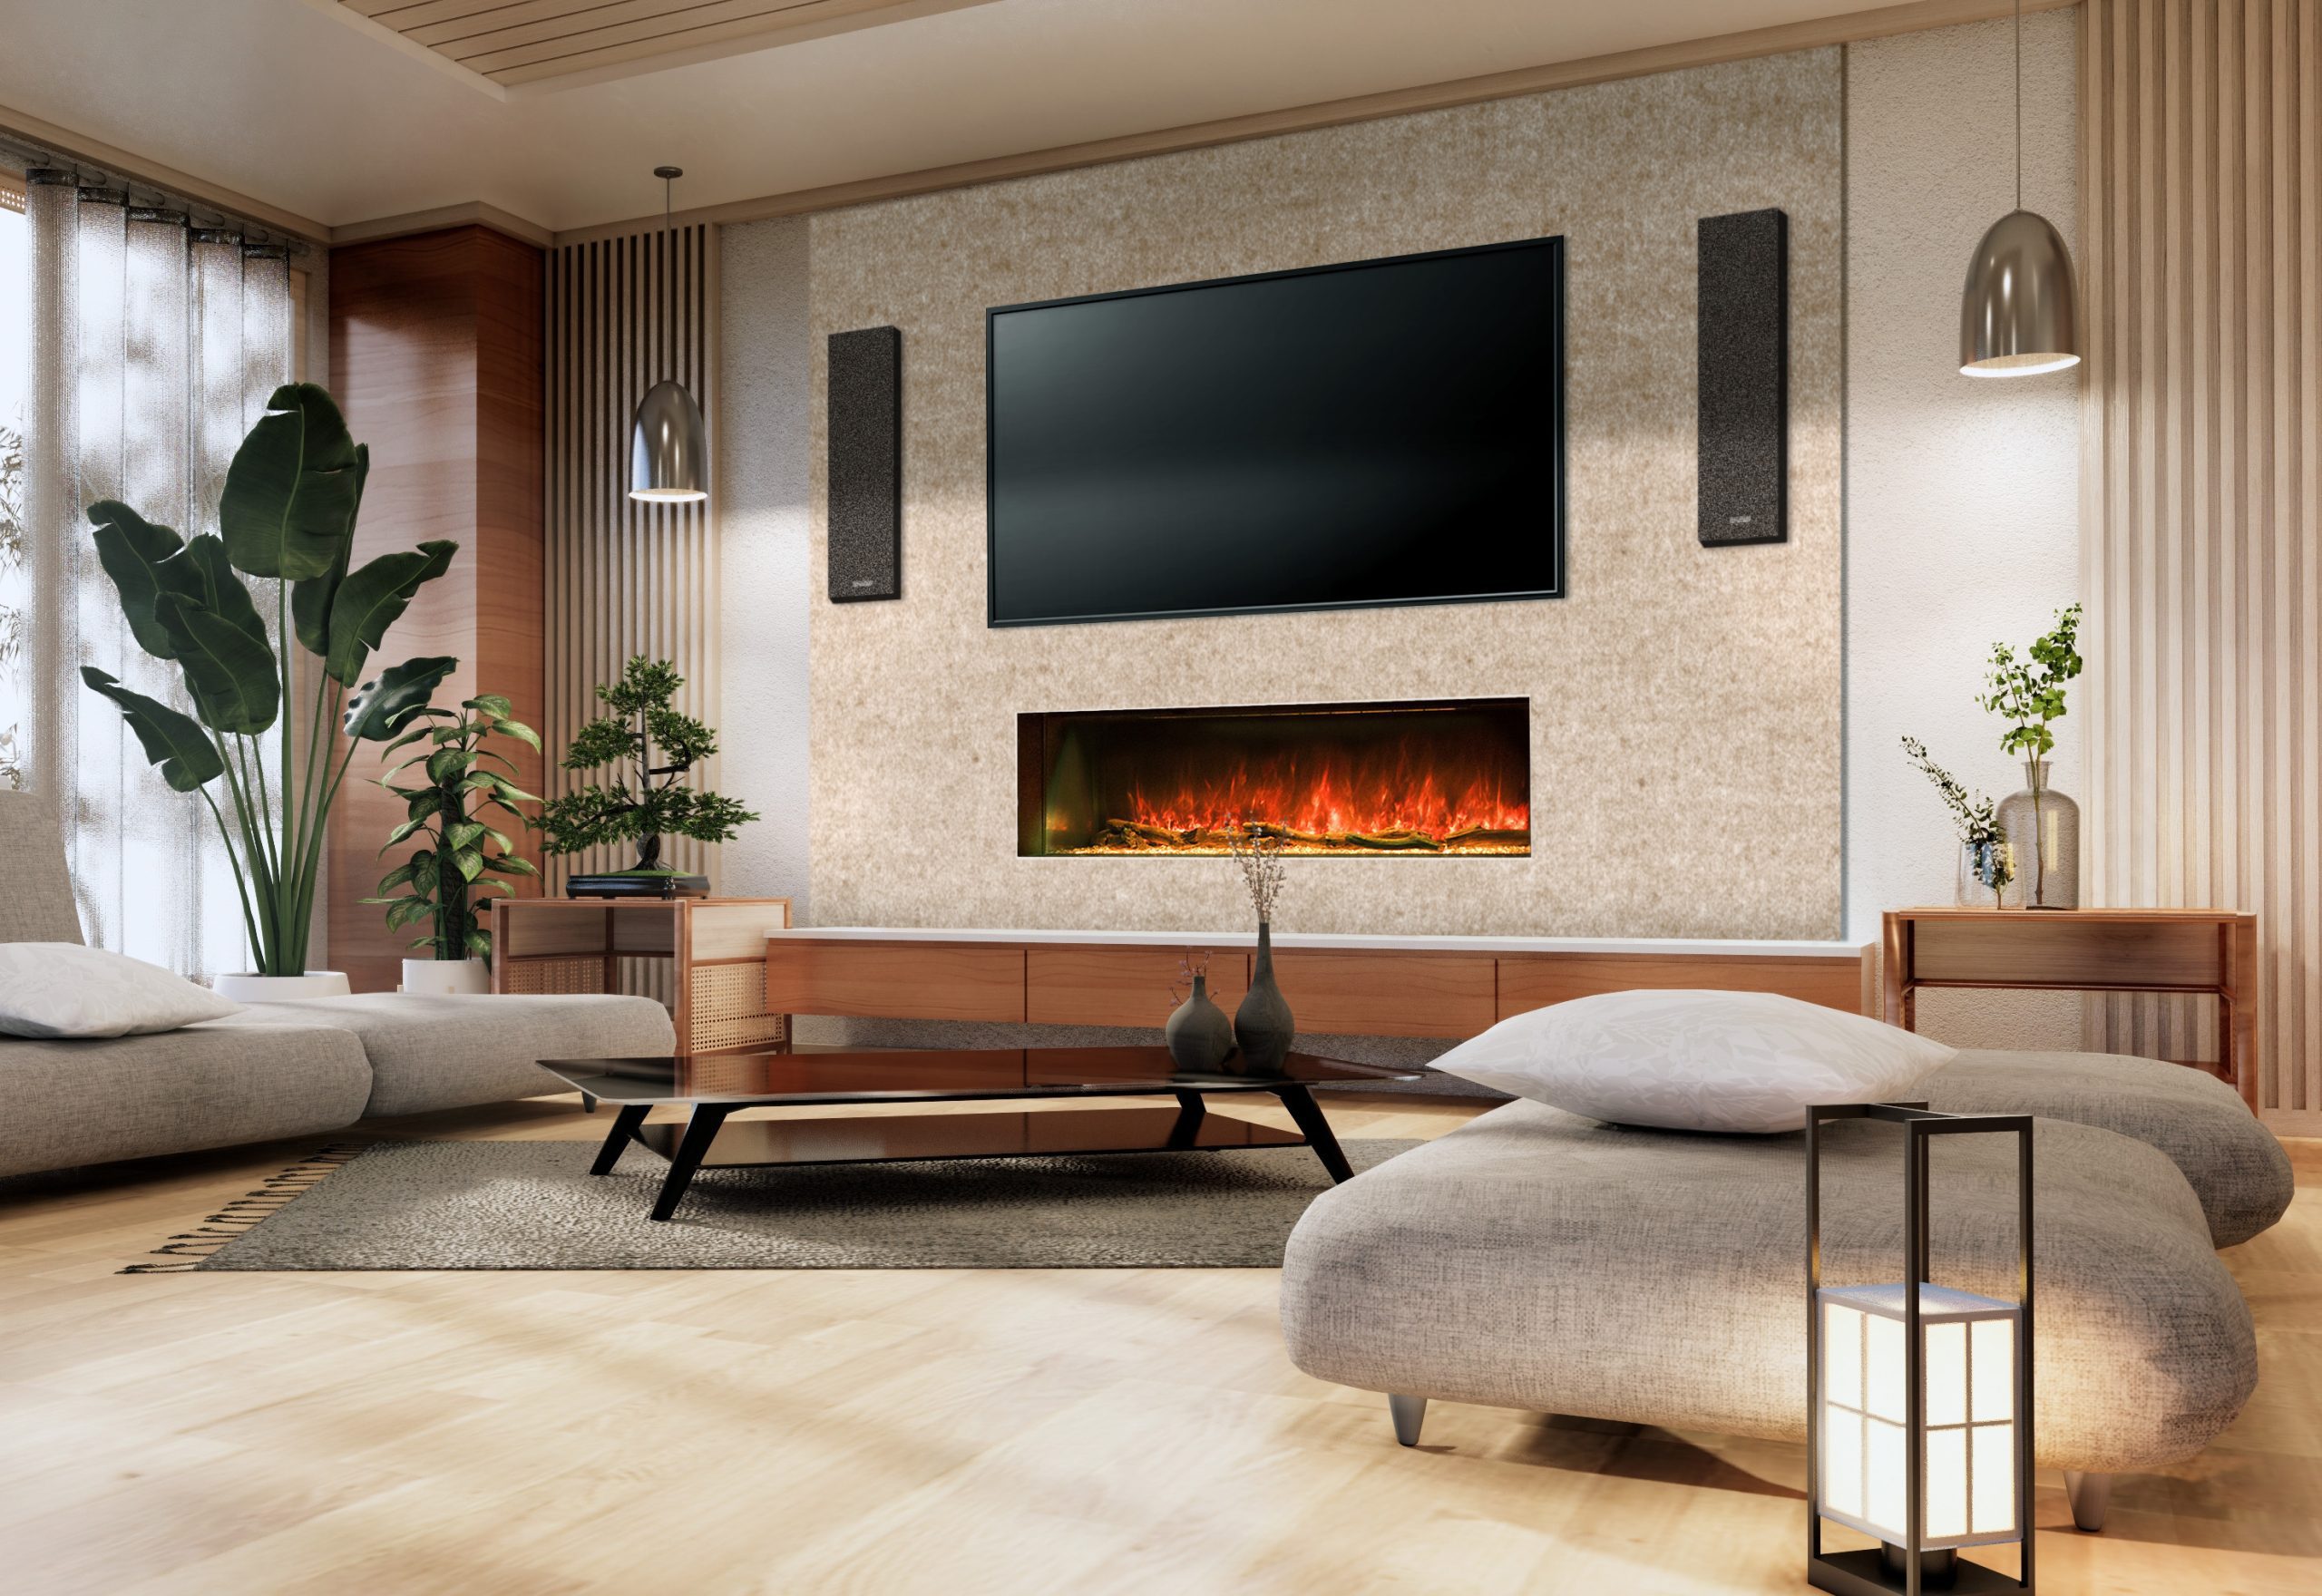 inset electric fire in media wall